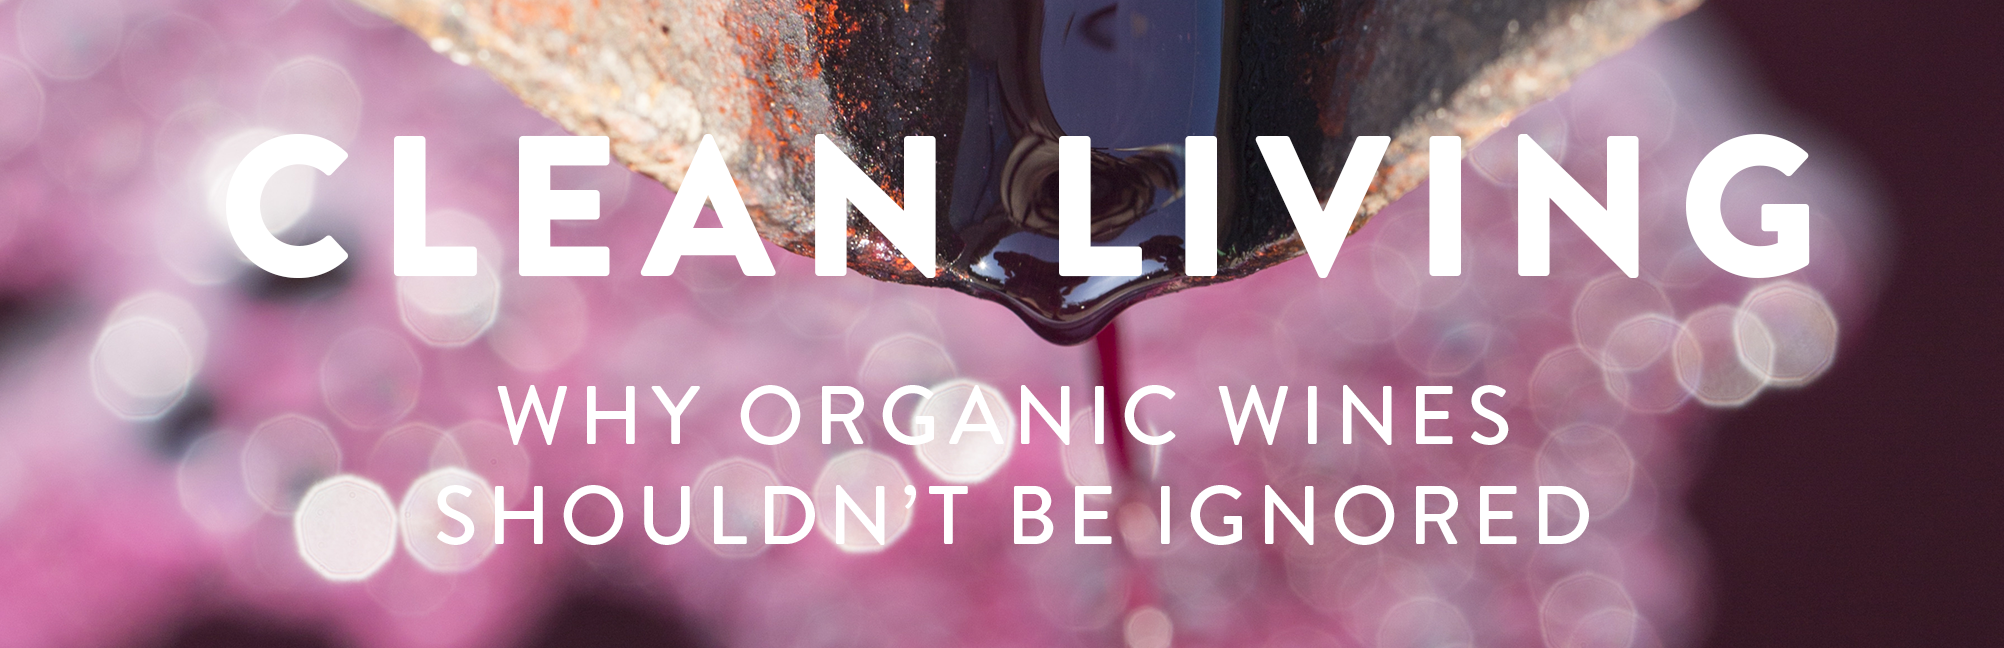 Clean Living - Why organic wines shouldn't be ignored